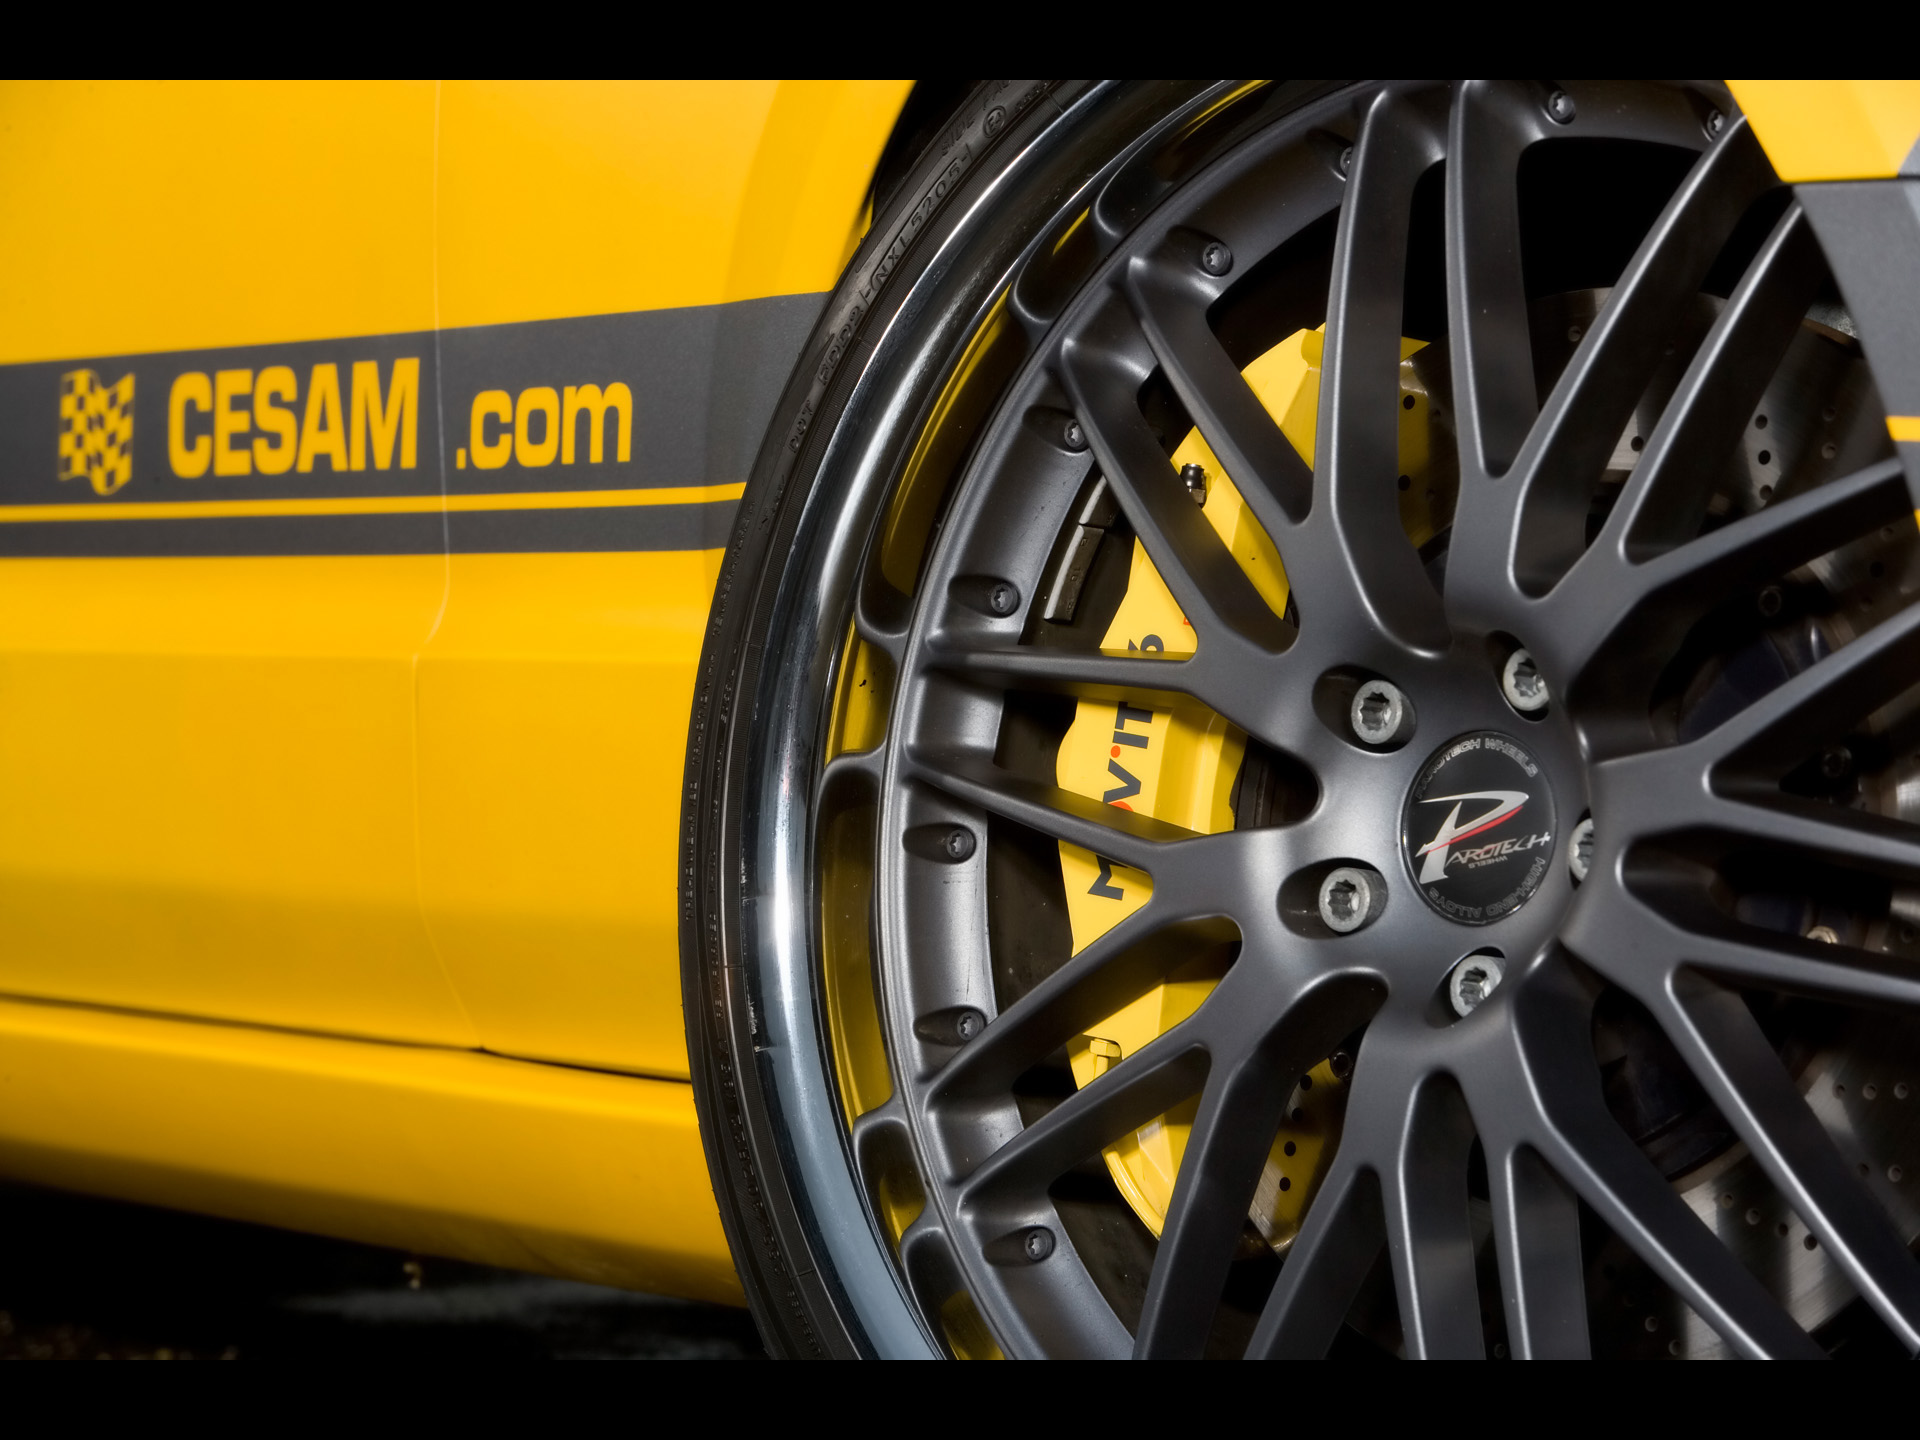 2007, Cesam, Ford, Mustang, Tuning, Muscle, Wheel, Wheels Wallpaper